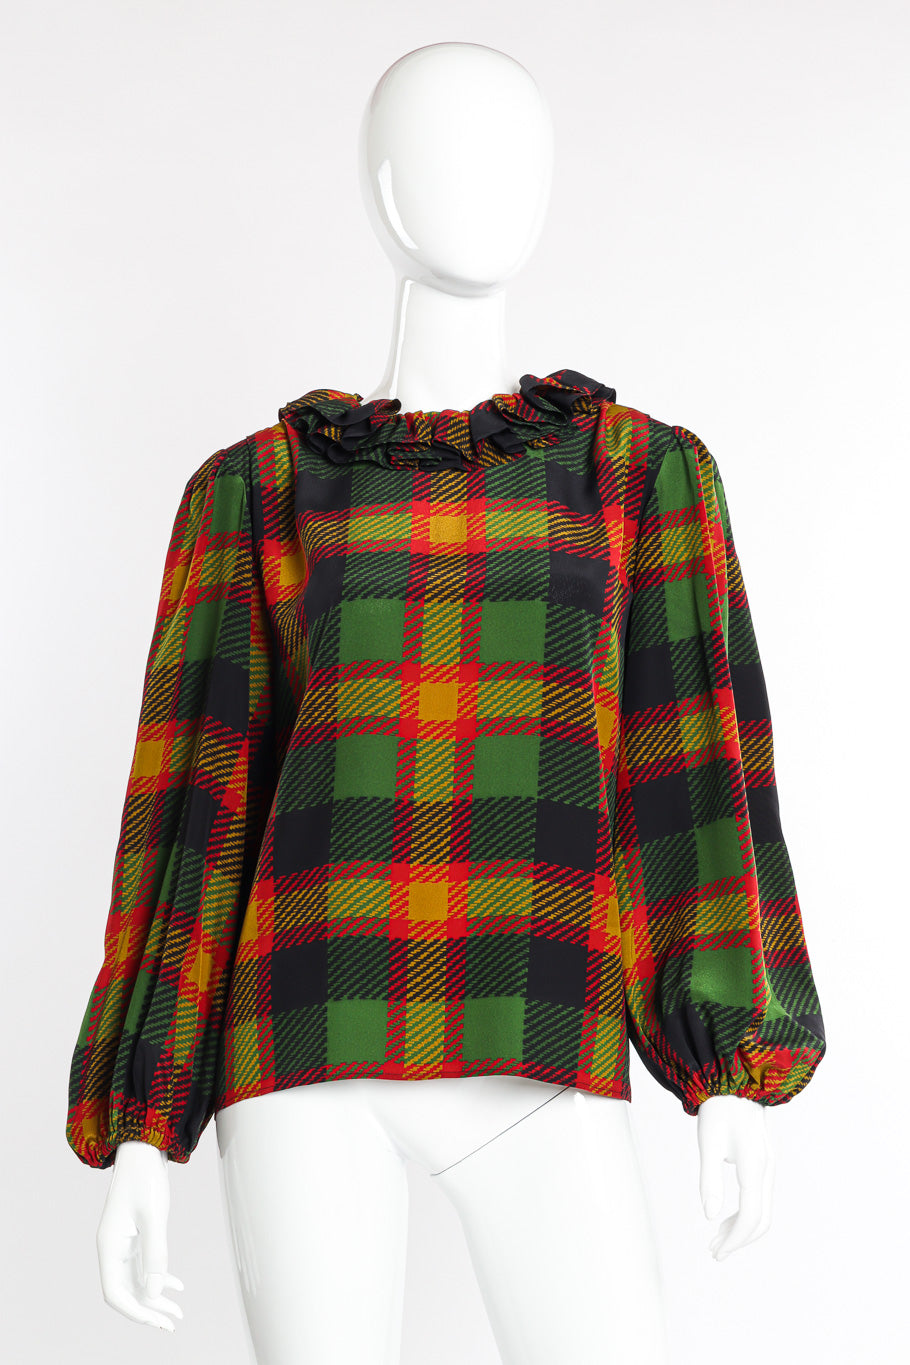 Ruffle Collar Houndstooth Blouse on mannequin front @recessla